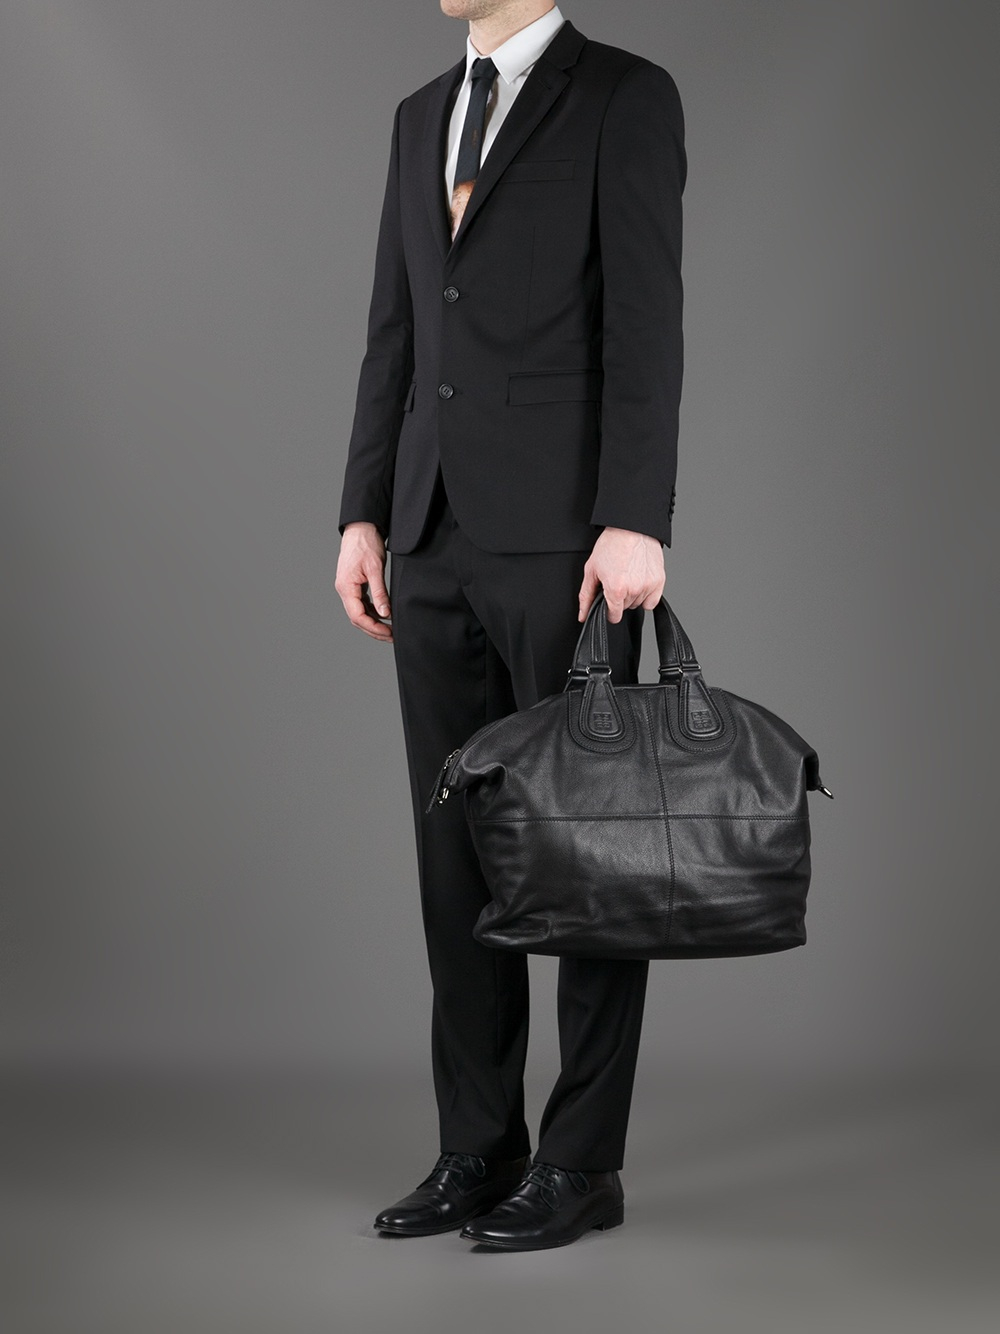 Givenchy Nightingale Tote in Black for 